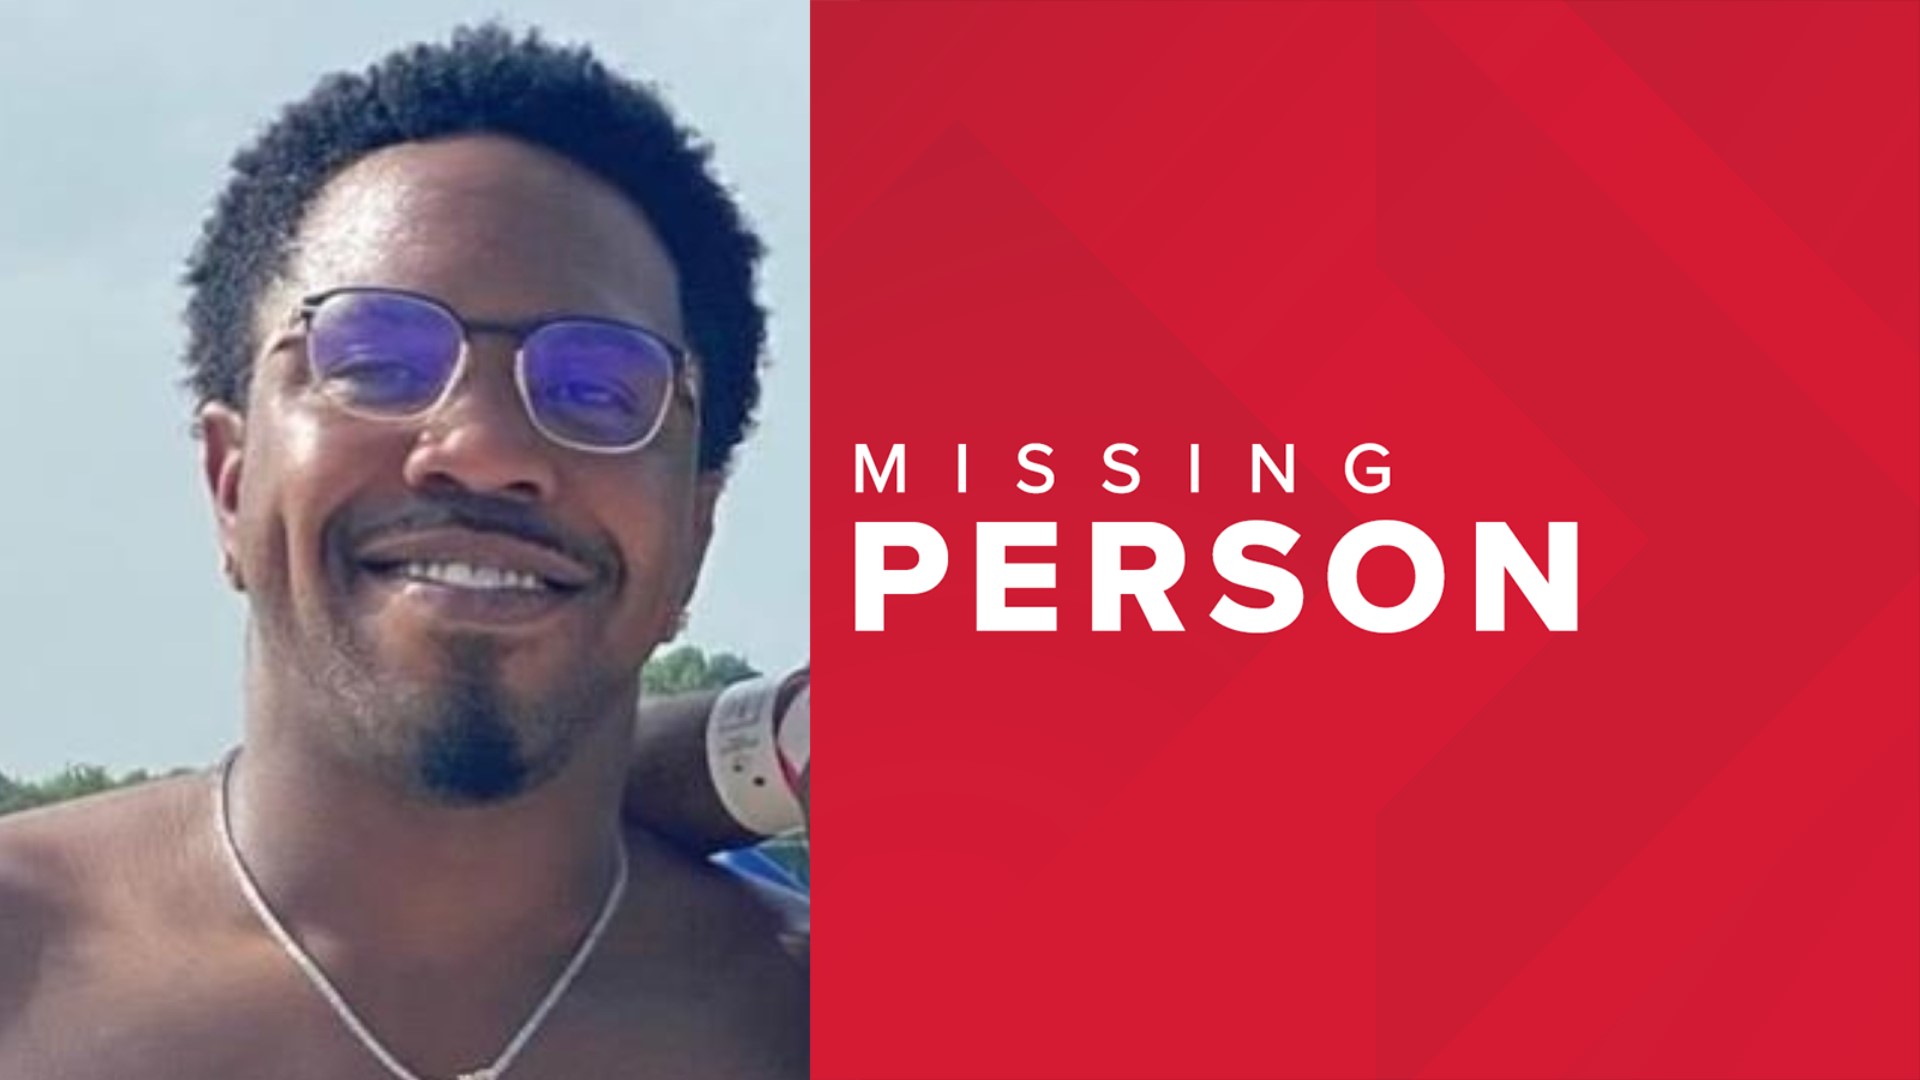 Daniel Brown, 35, was last seen in west Houston on January 25th. Anayeli Ruiz spoke to his mother who has been desperately looking for him day in and day out.